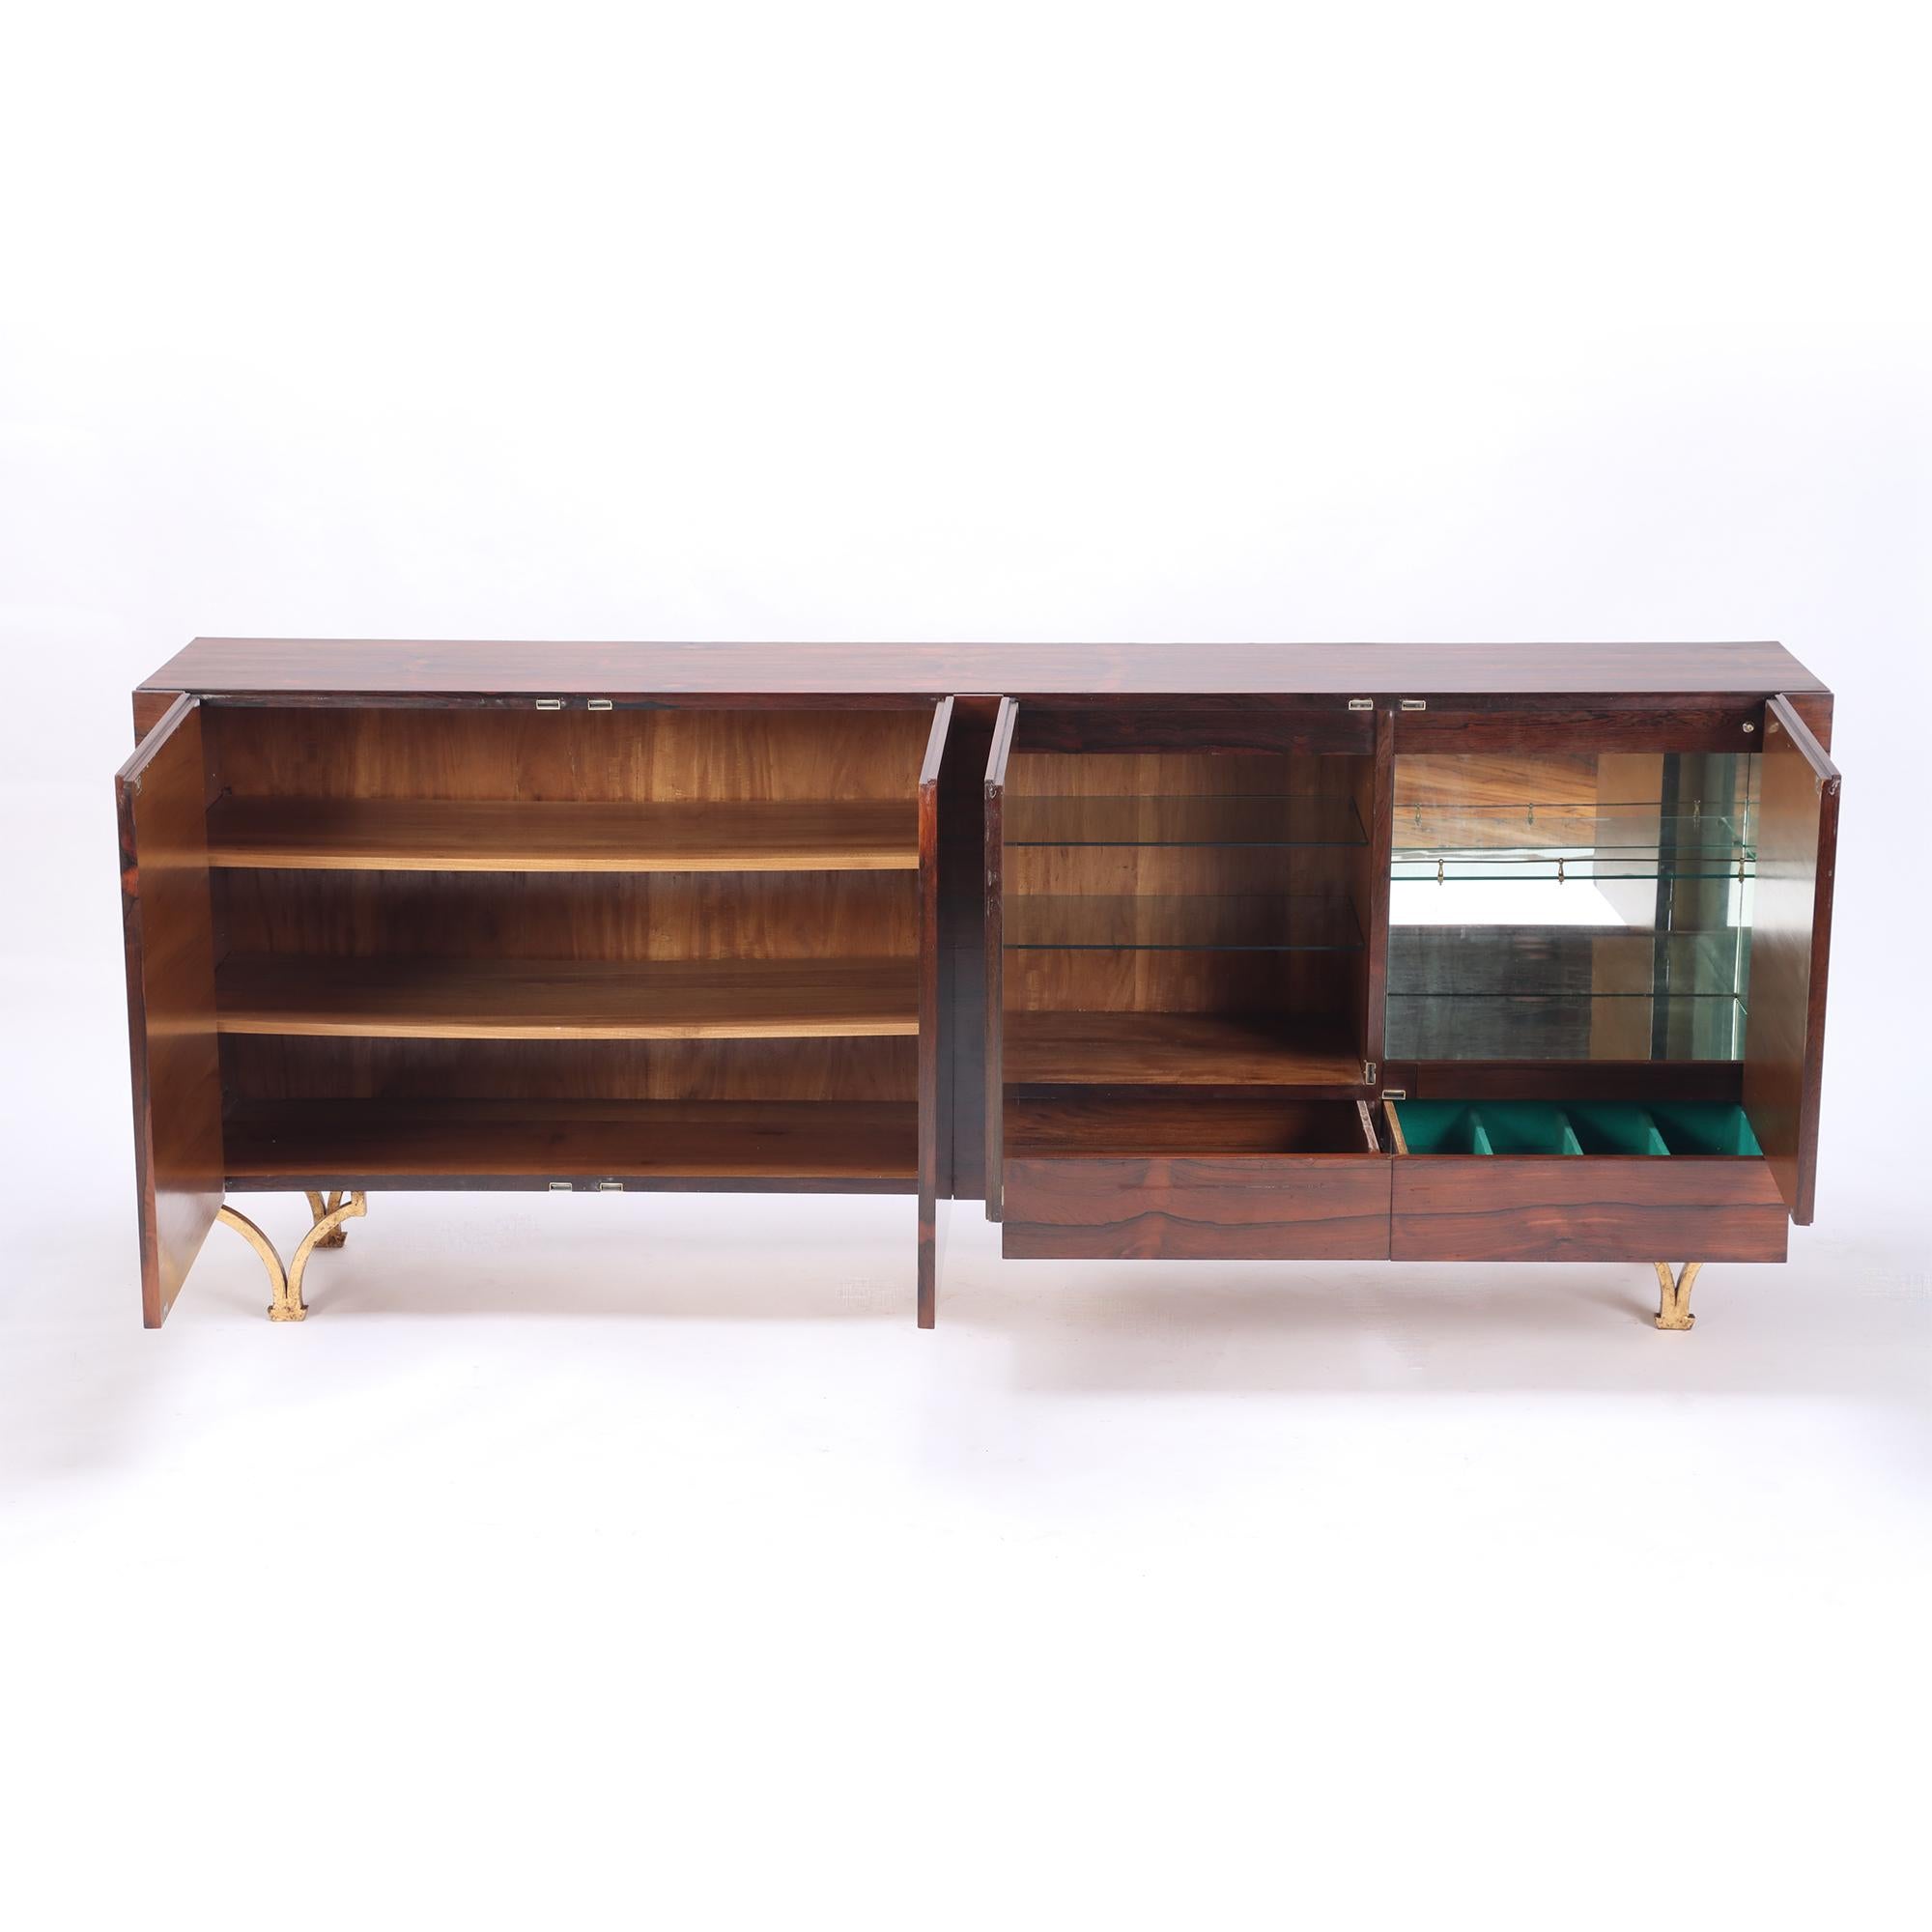 A Mid-Century Modern Italian four door rosewood sideboard, with gilt iron feet. Circa 1960. One drawer has defined compartments with felt, one cabinet fitted with glass shelves.